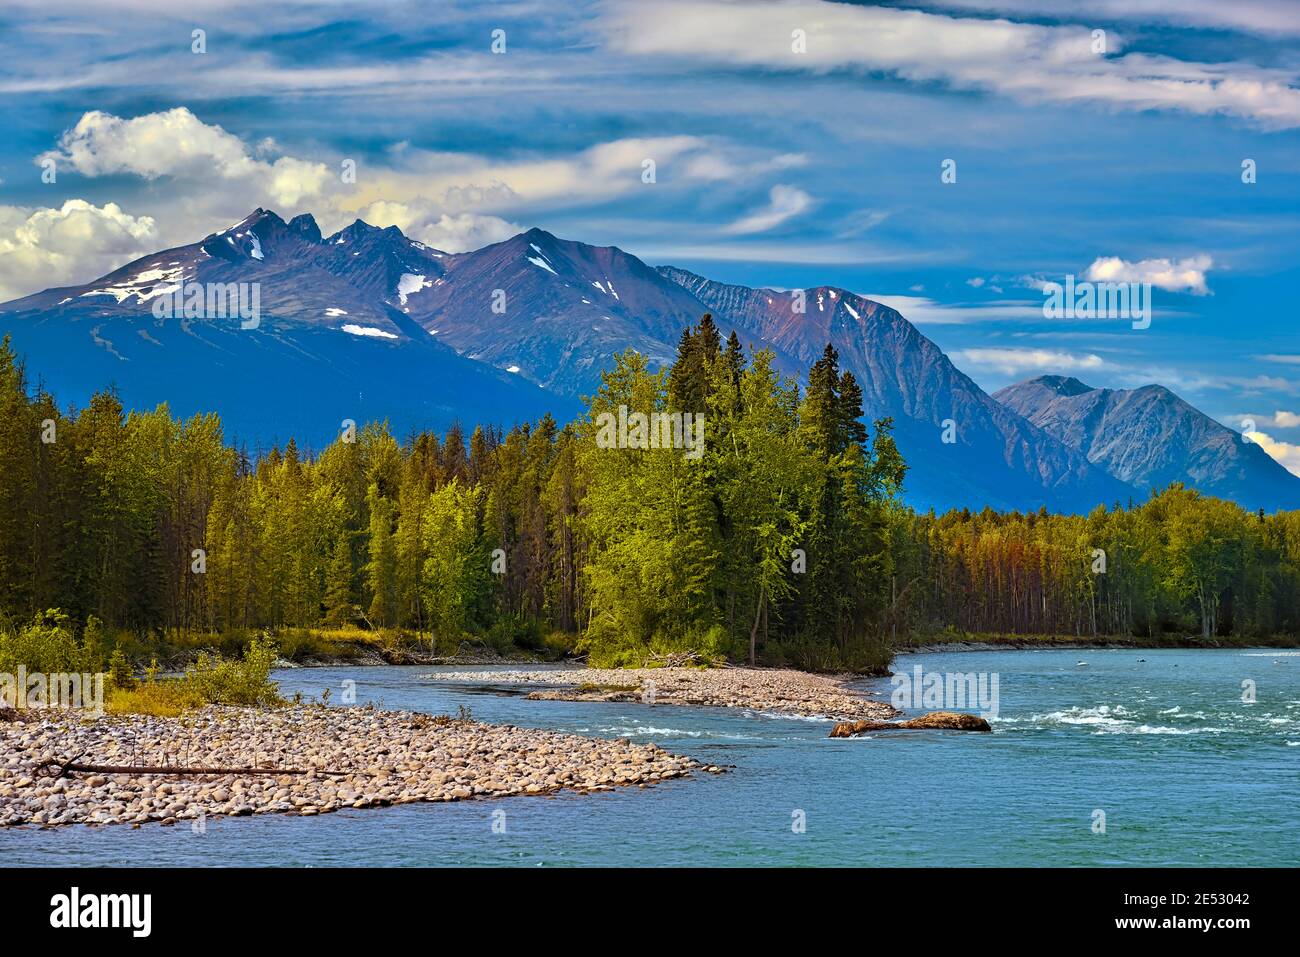 A scenic view of Hudson Bay mountain with the famous Bulkley river in the foreground taken near Smithers, British Columbia Canada Stock Photo